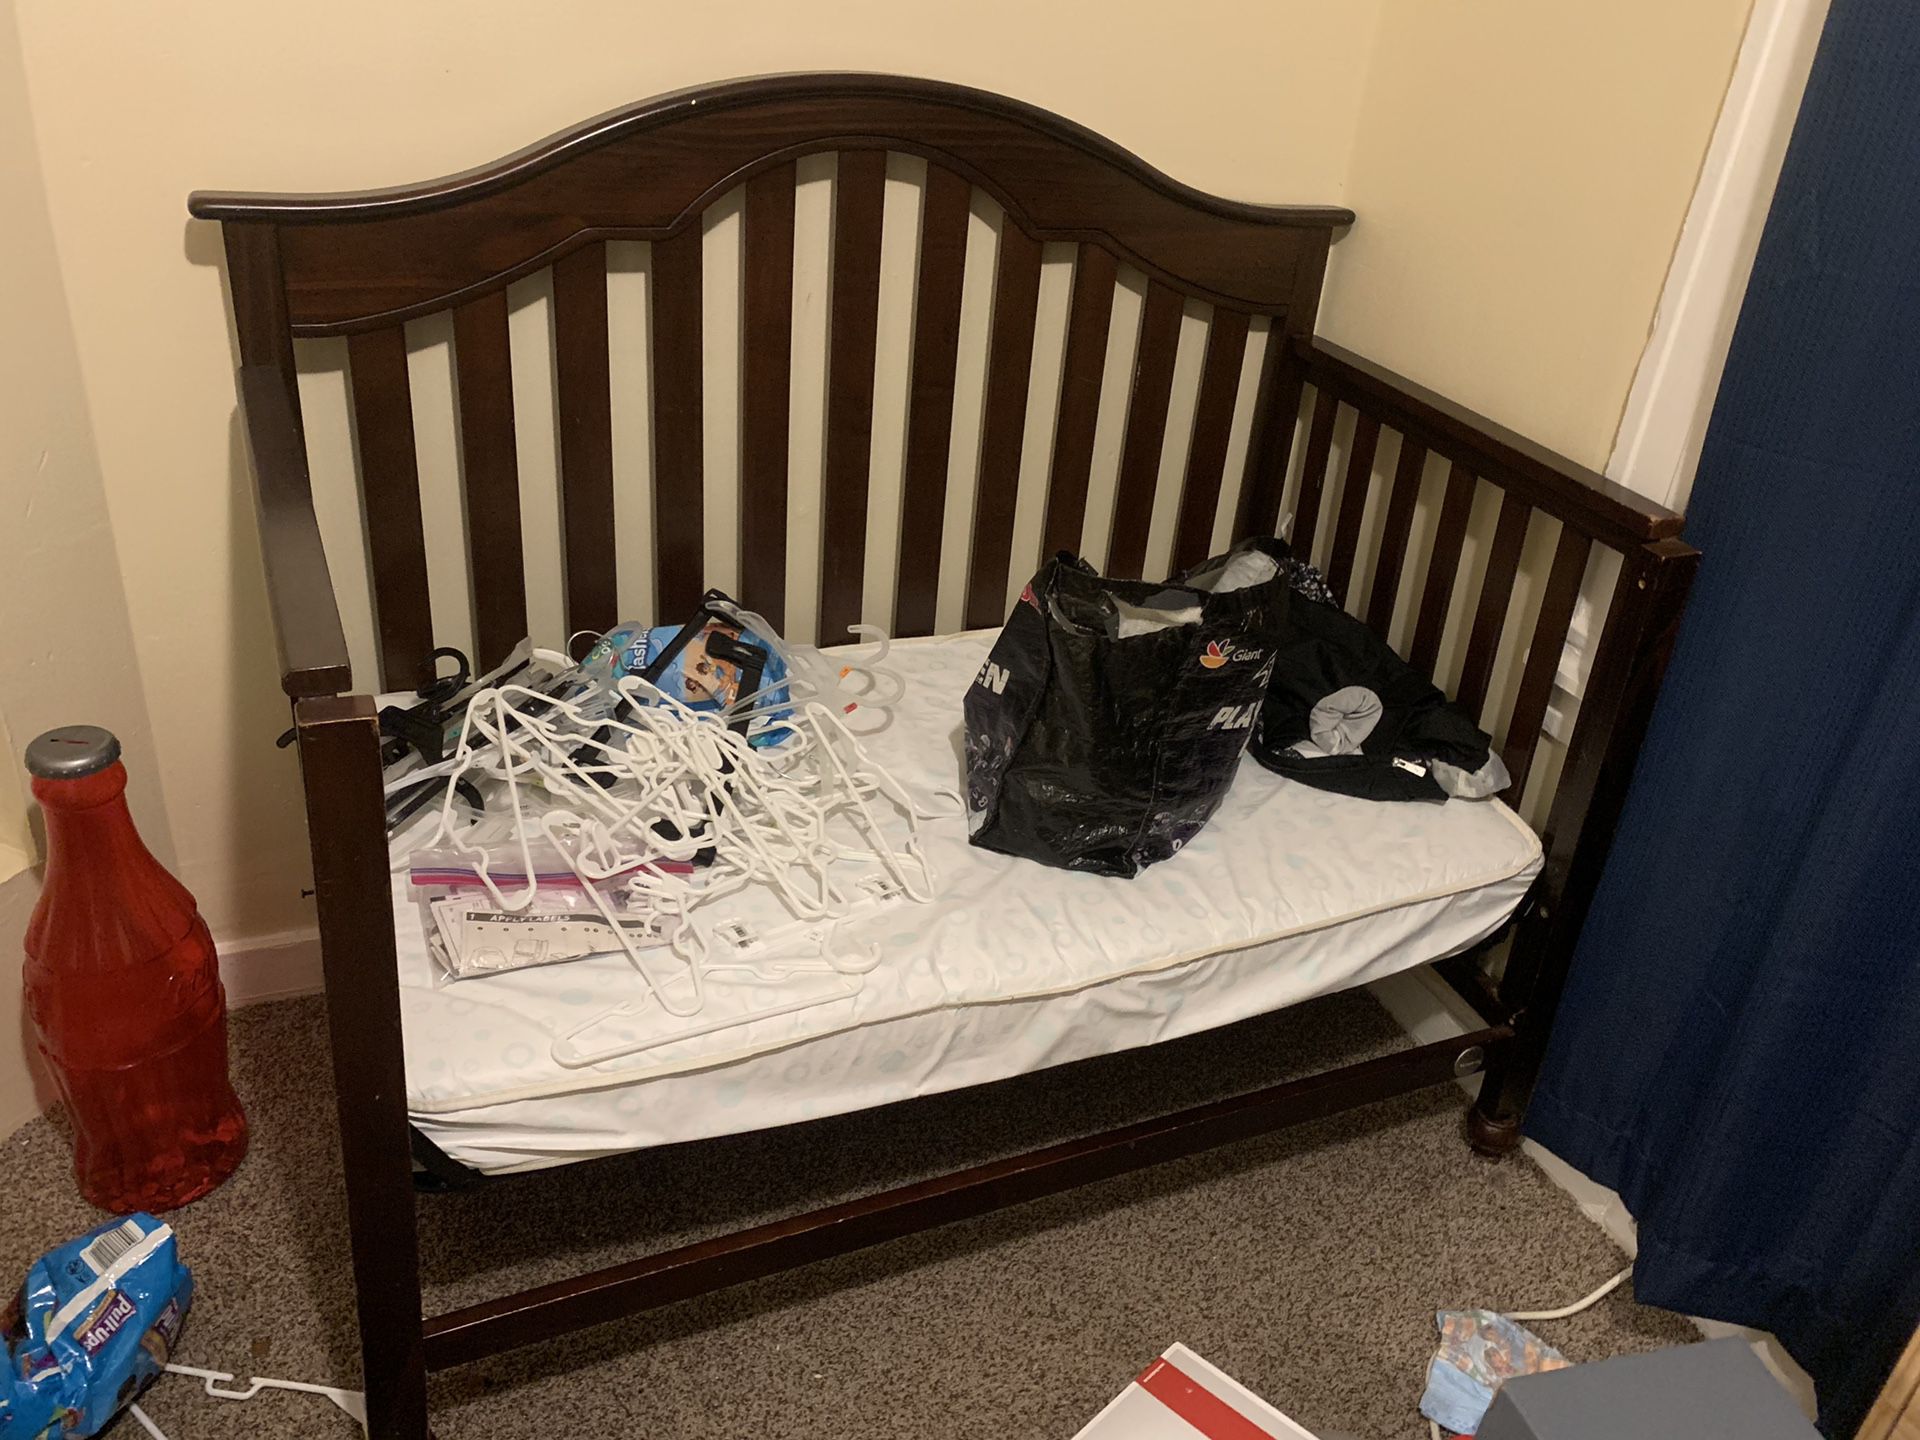 Baby crib mattress not included